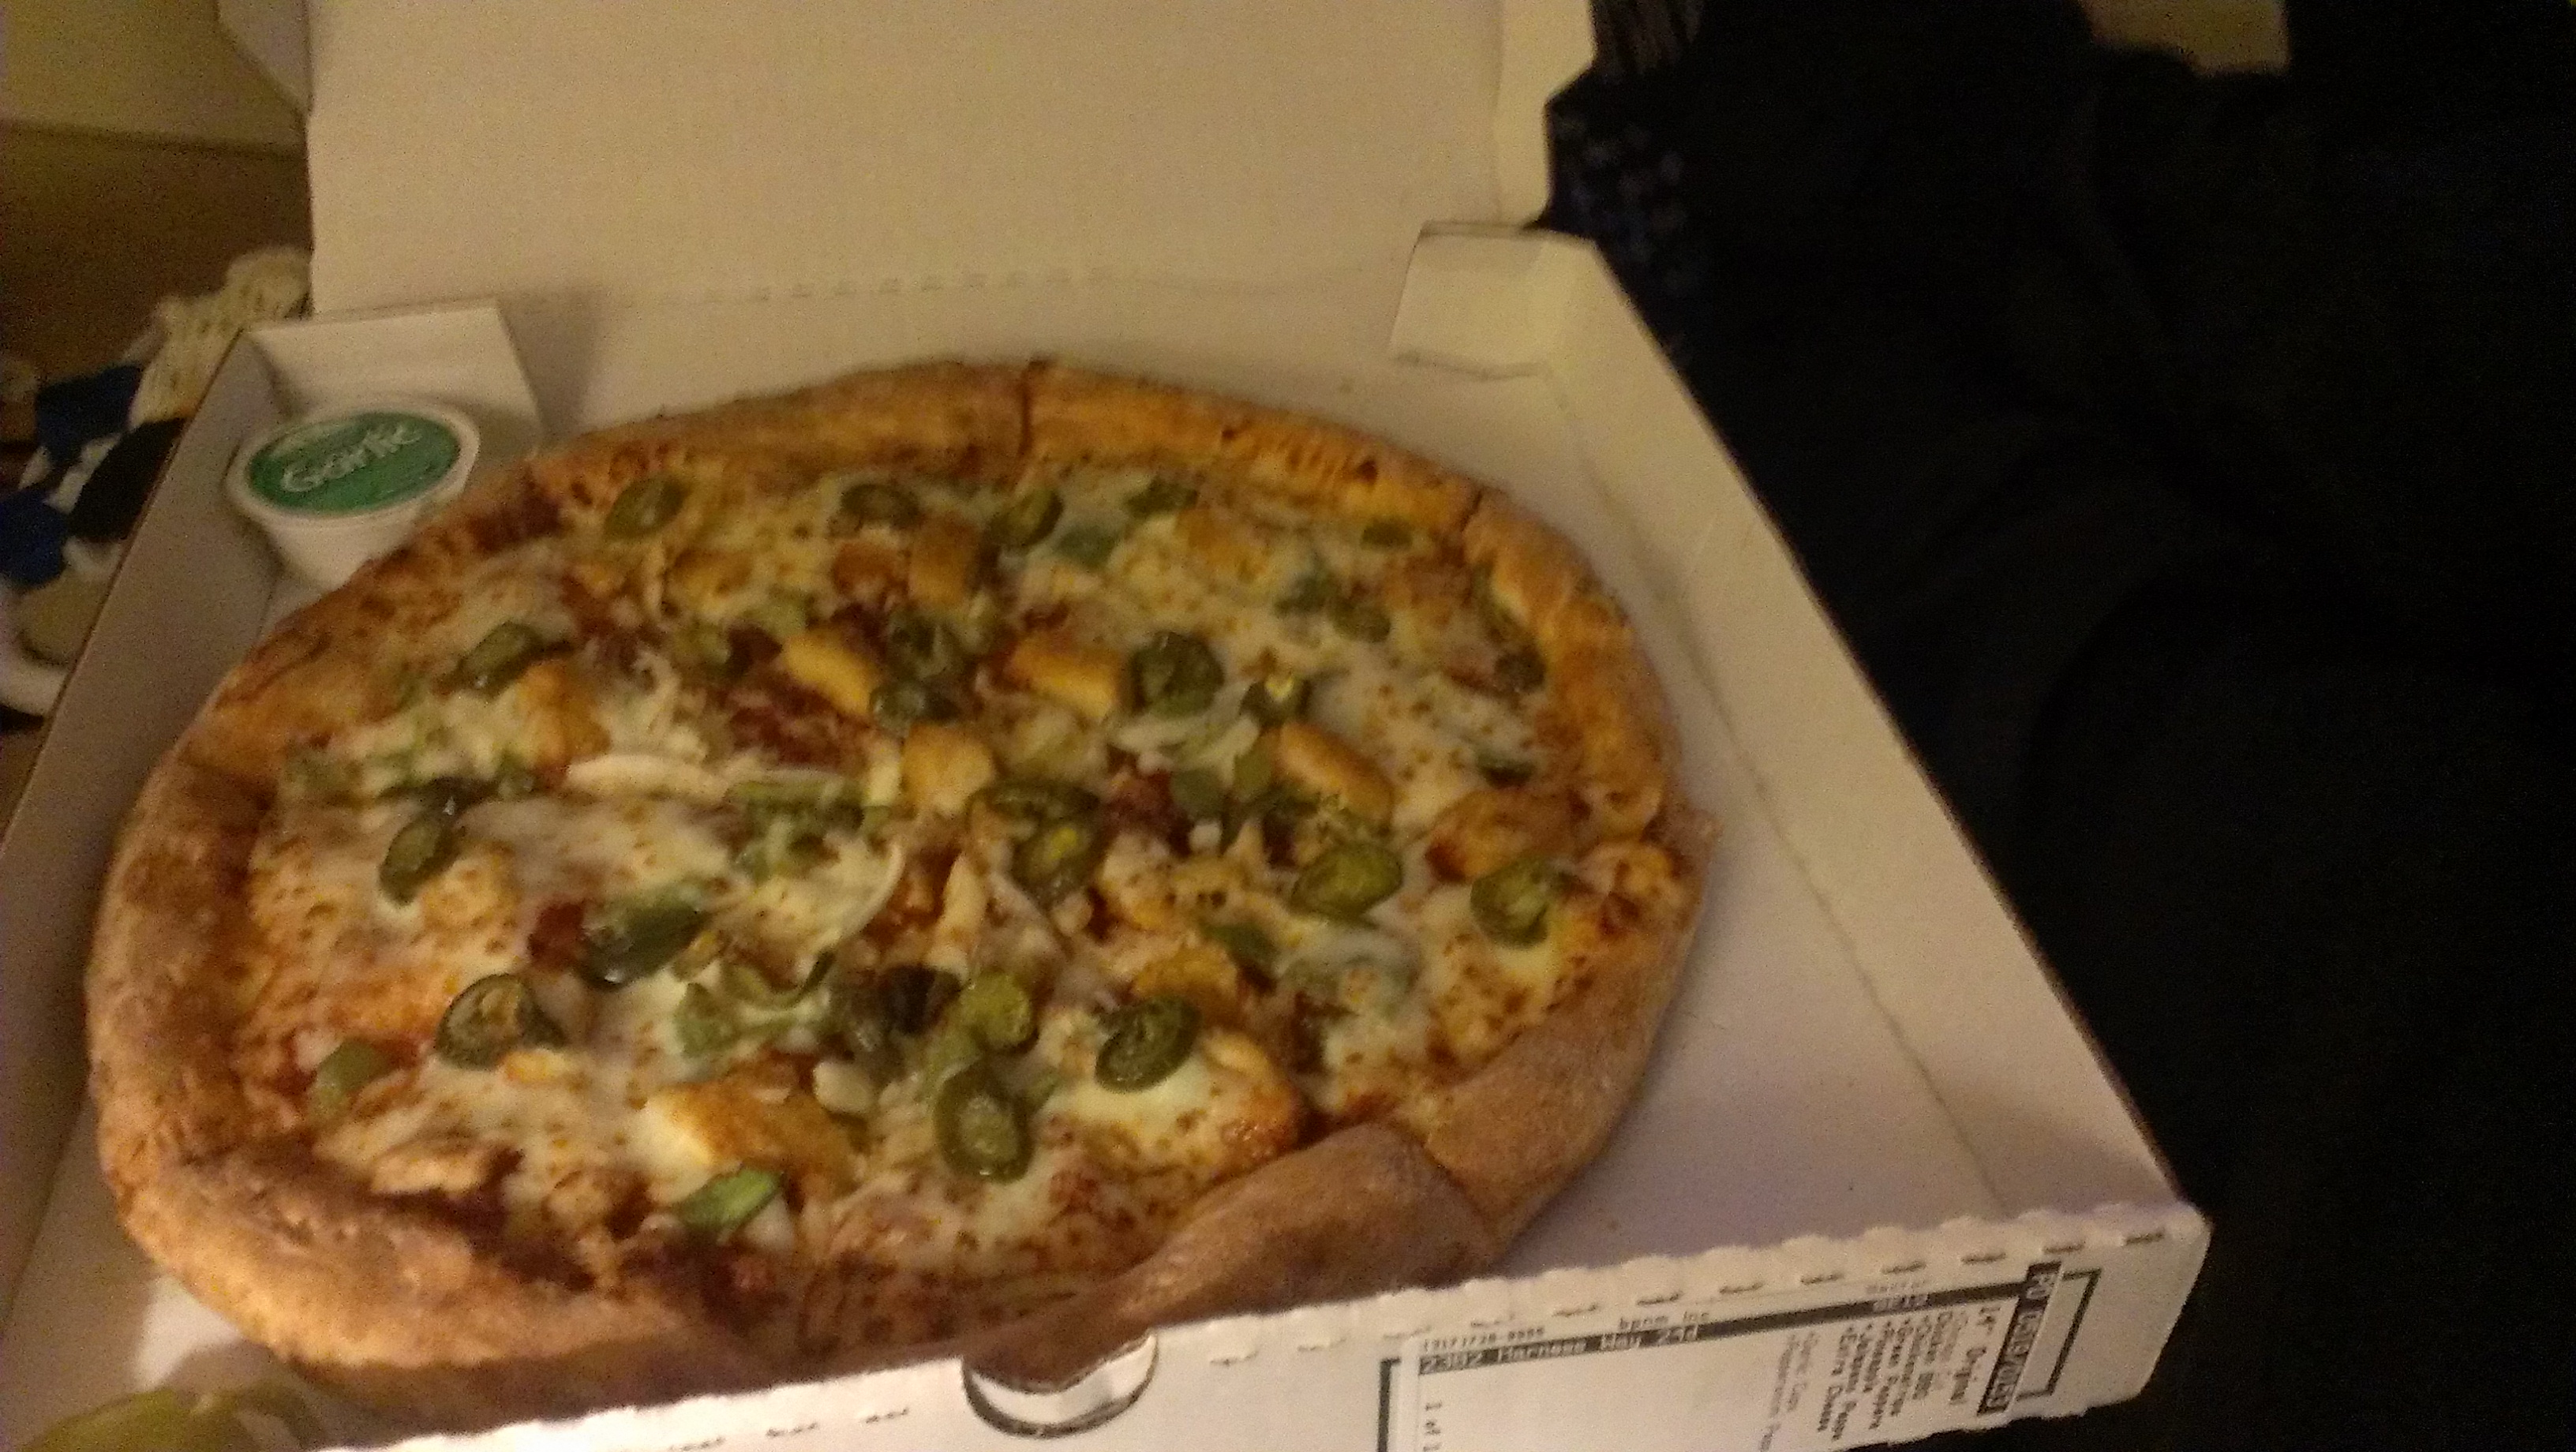 picture shows pizza regular cut not chicago cut 